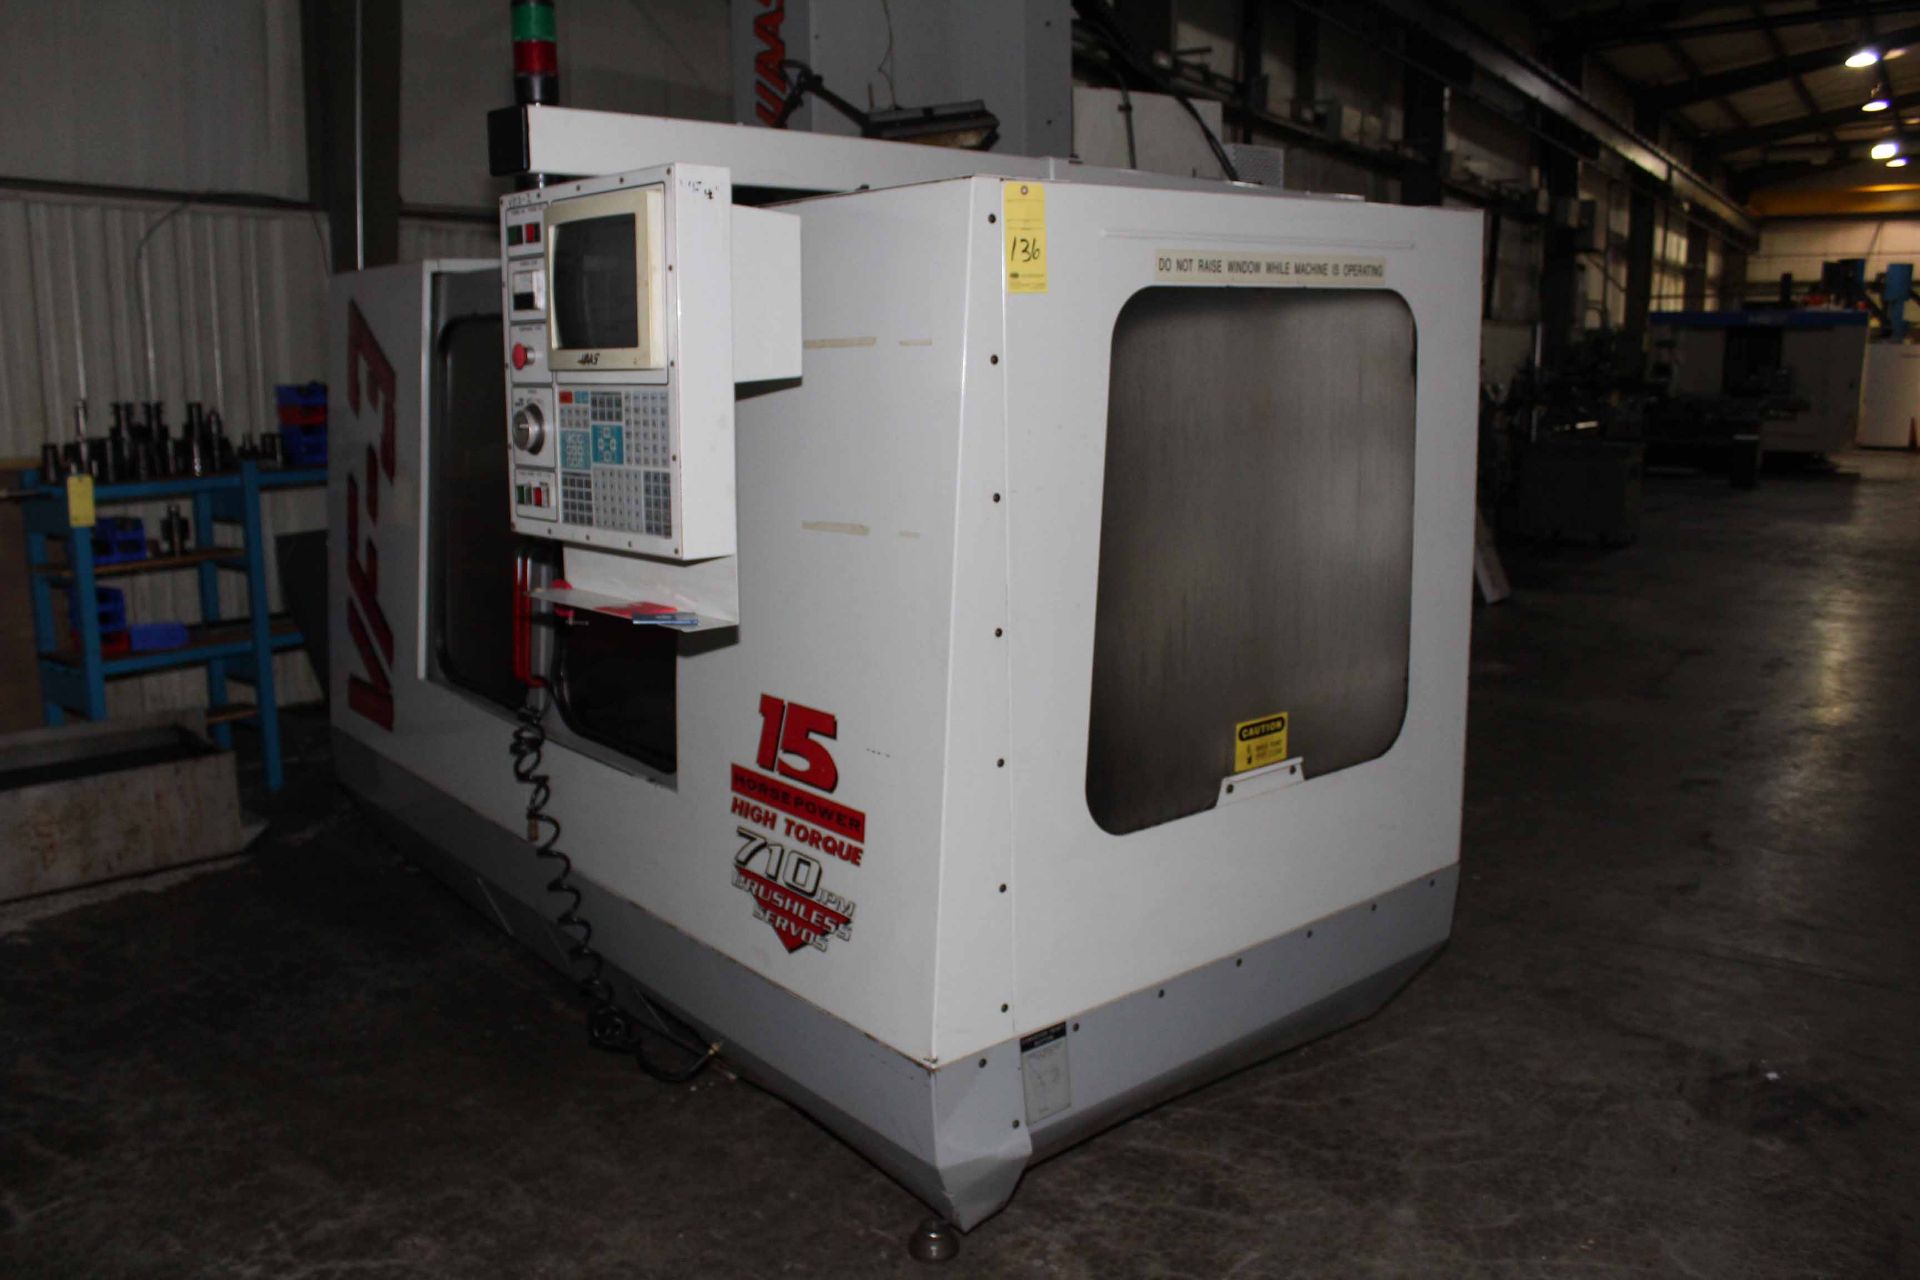 4-AXIS VERTICAL MACHINING CENTER, HAAS MDL. VF-3, new 3/1997, Haas CNC control, 18 x 48” table, 3,